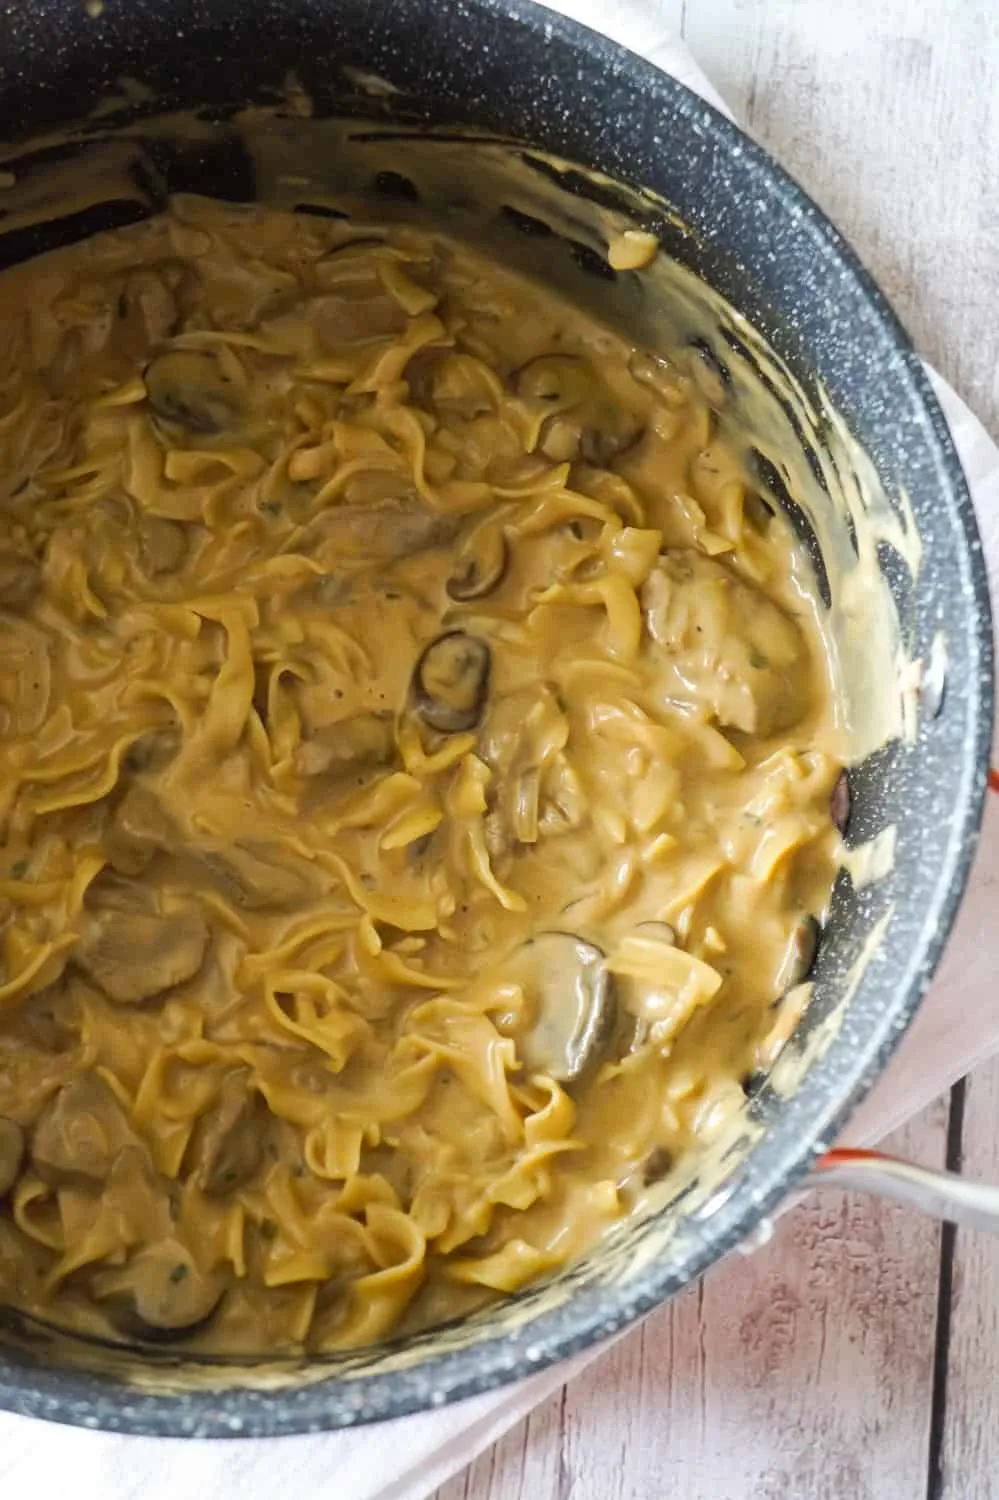 Easy Beef Stroganoff is a delicious one pot dinner recipe loaded with steak strips, onions, mushrooms and egg noodles in a sour cream and beef gravy sauce.